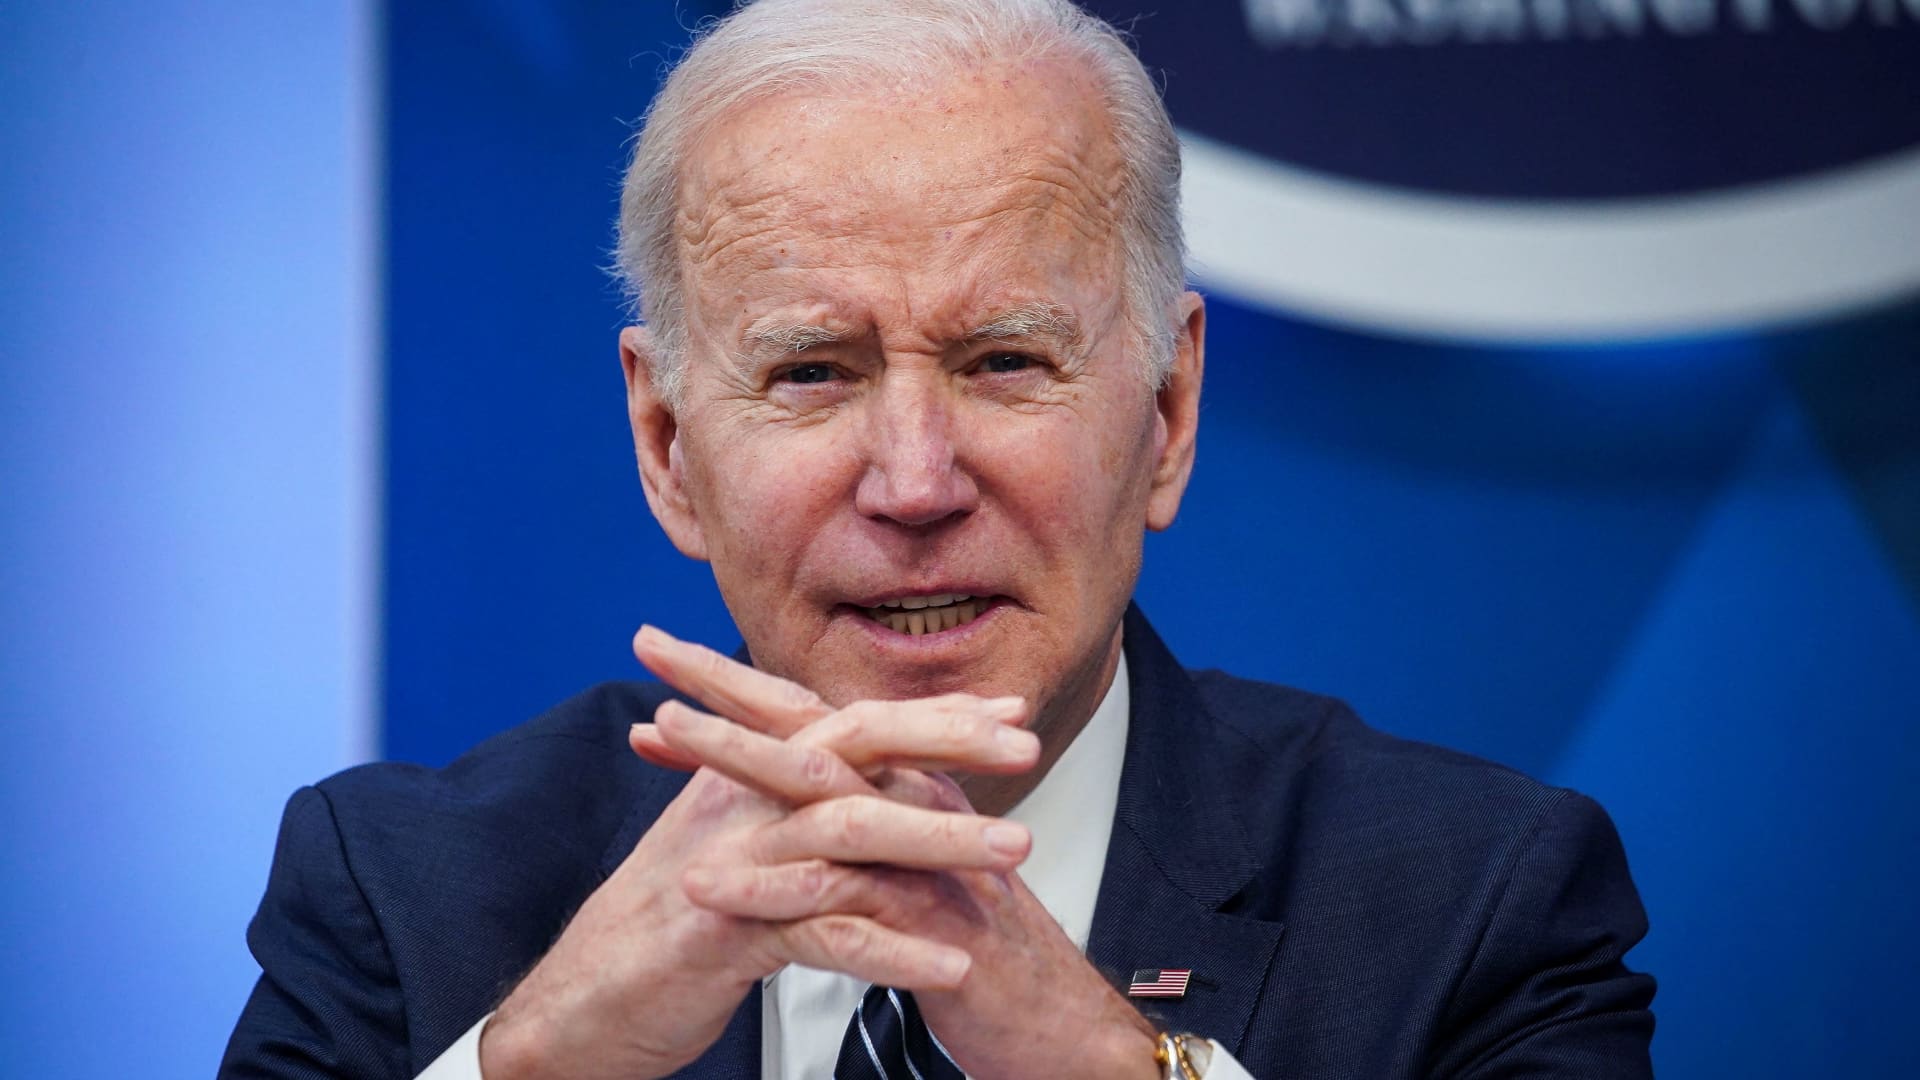 U.S. President Joe Biden speaks during a meeting about ARPA-H, a health research agency that seeks to accelerate progress on curing cancer and additional health innovations, in the South Court Auditorium on the White House complex, in Washington, March 18, 2022.